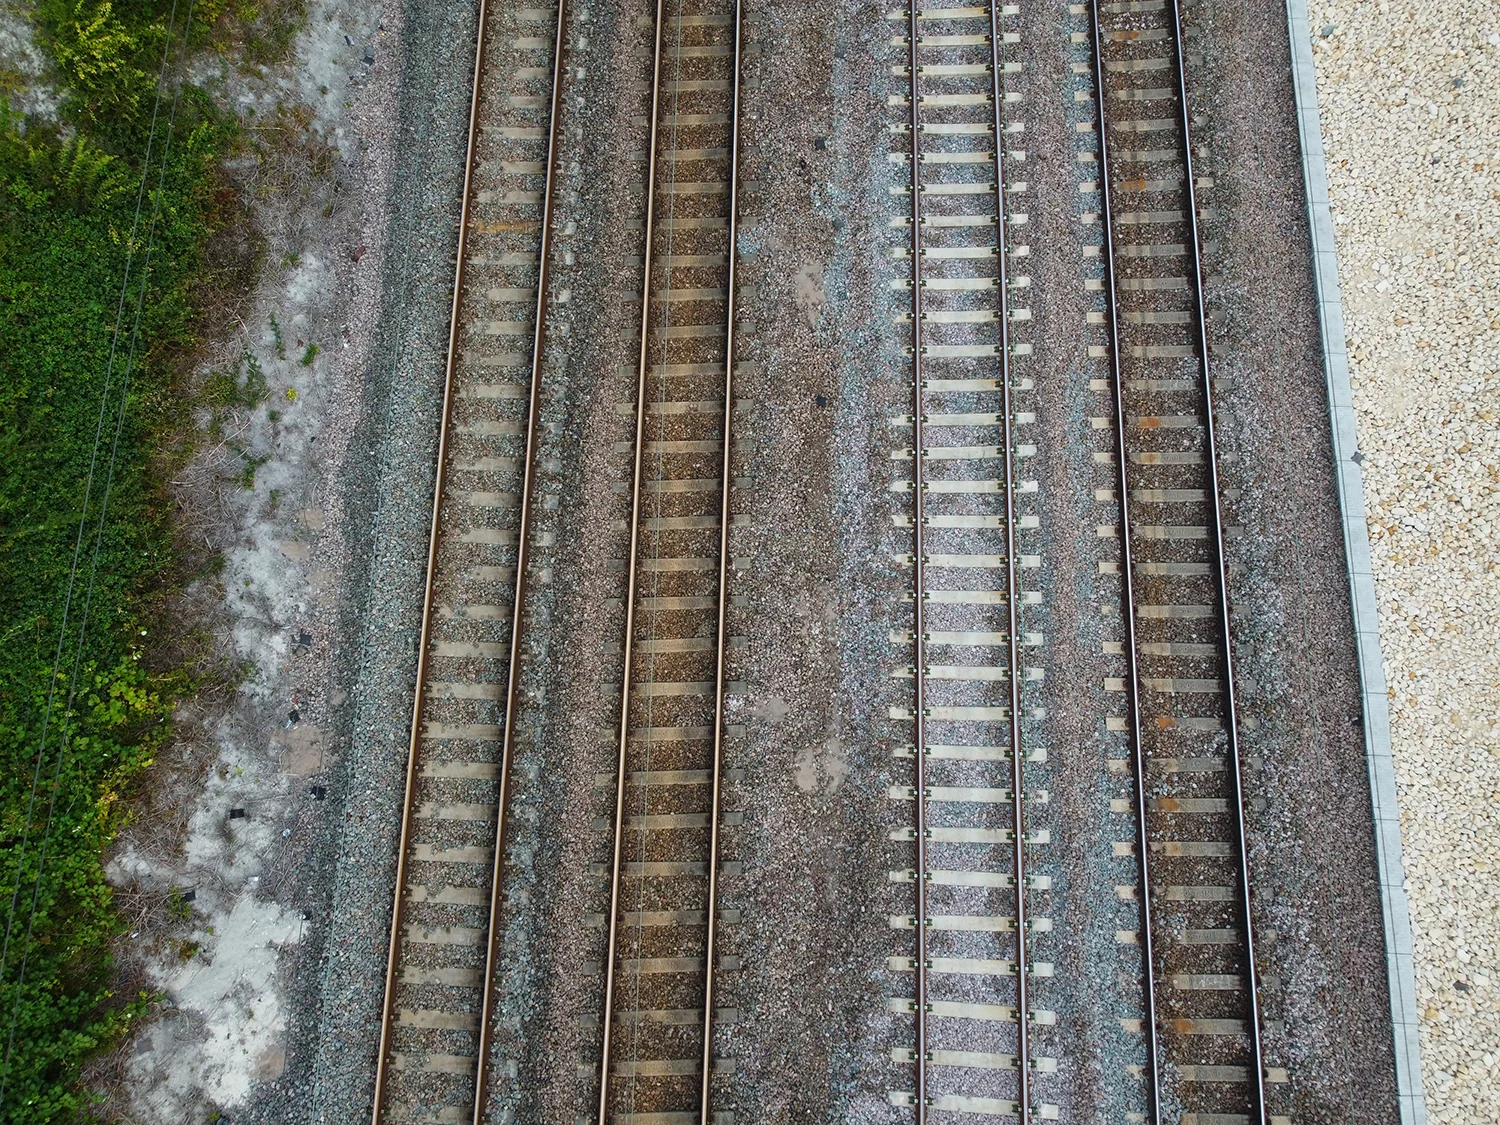 A view of multiple parallel railway tracks seen from above.